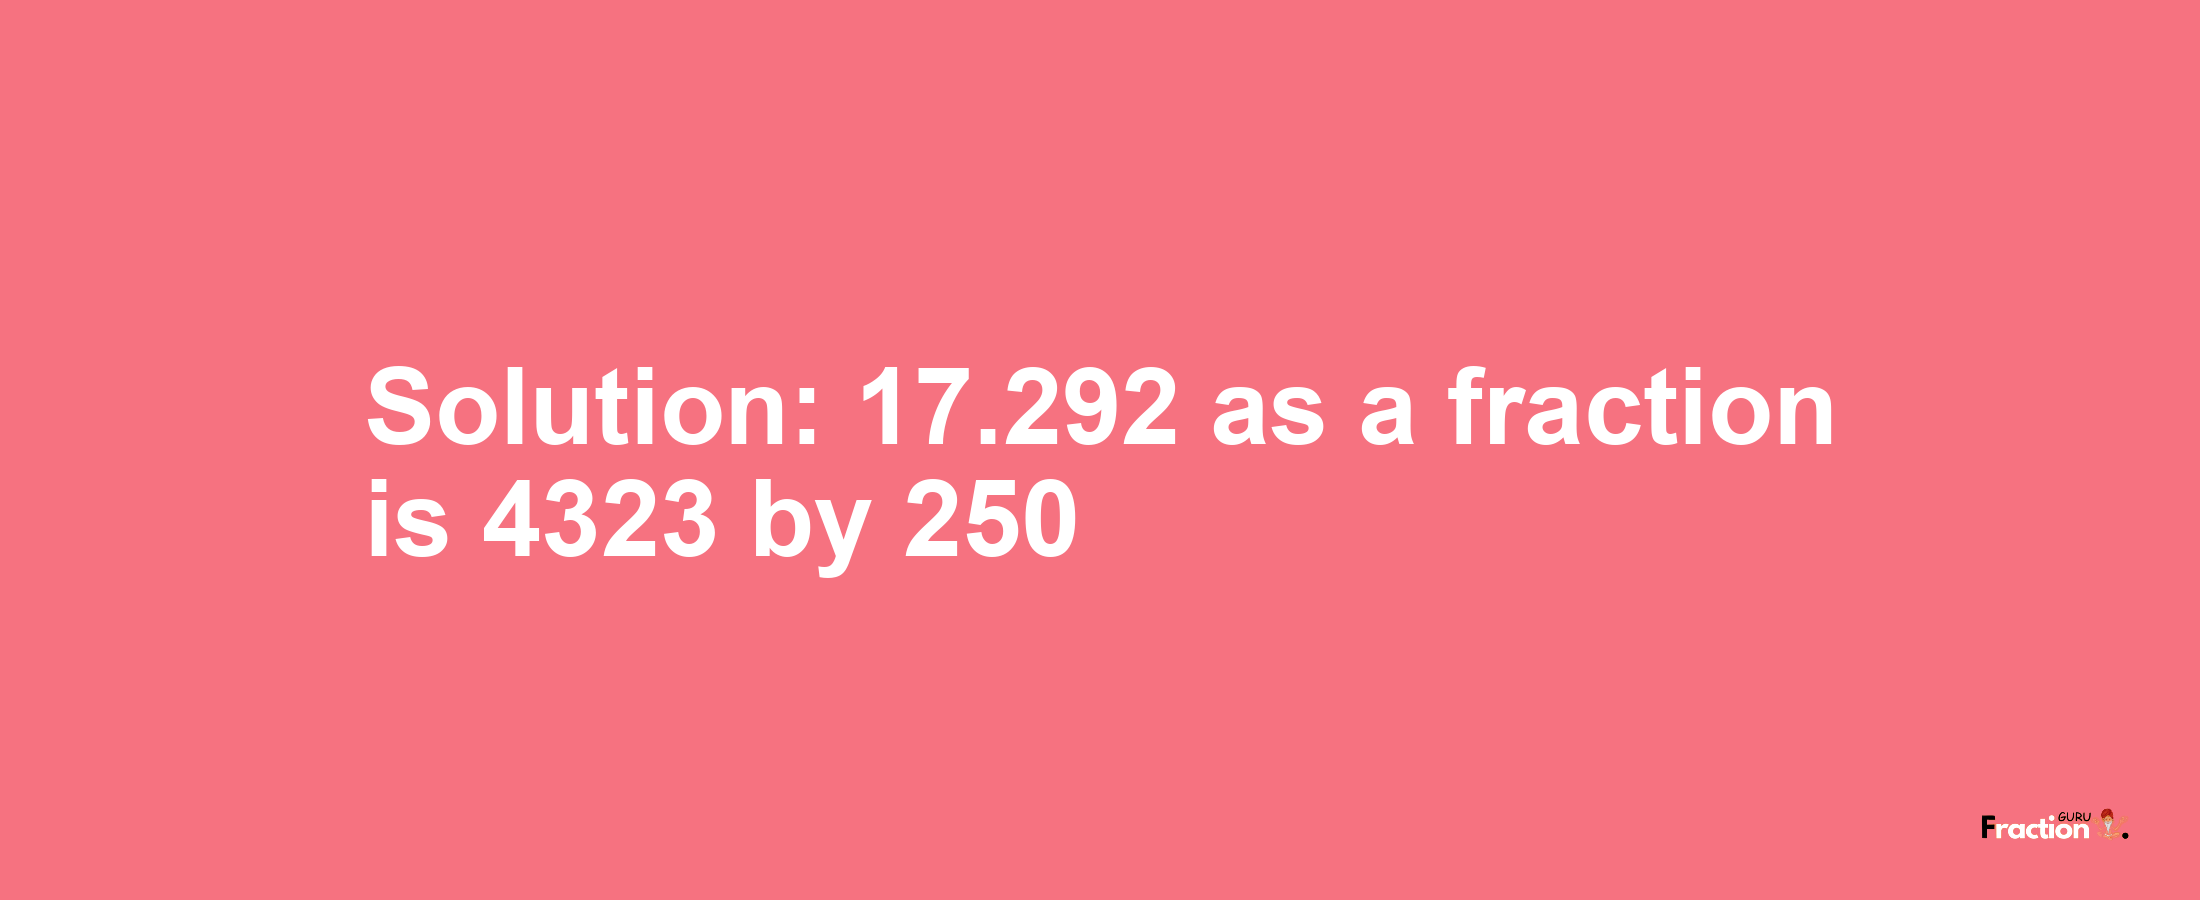 Solution:17.292 as a fraction is 4323/250